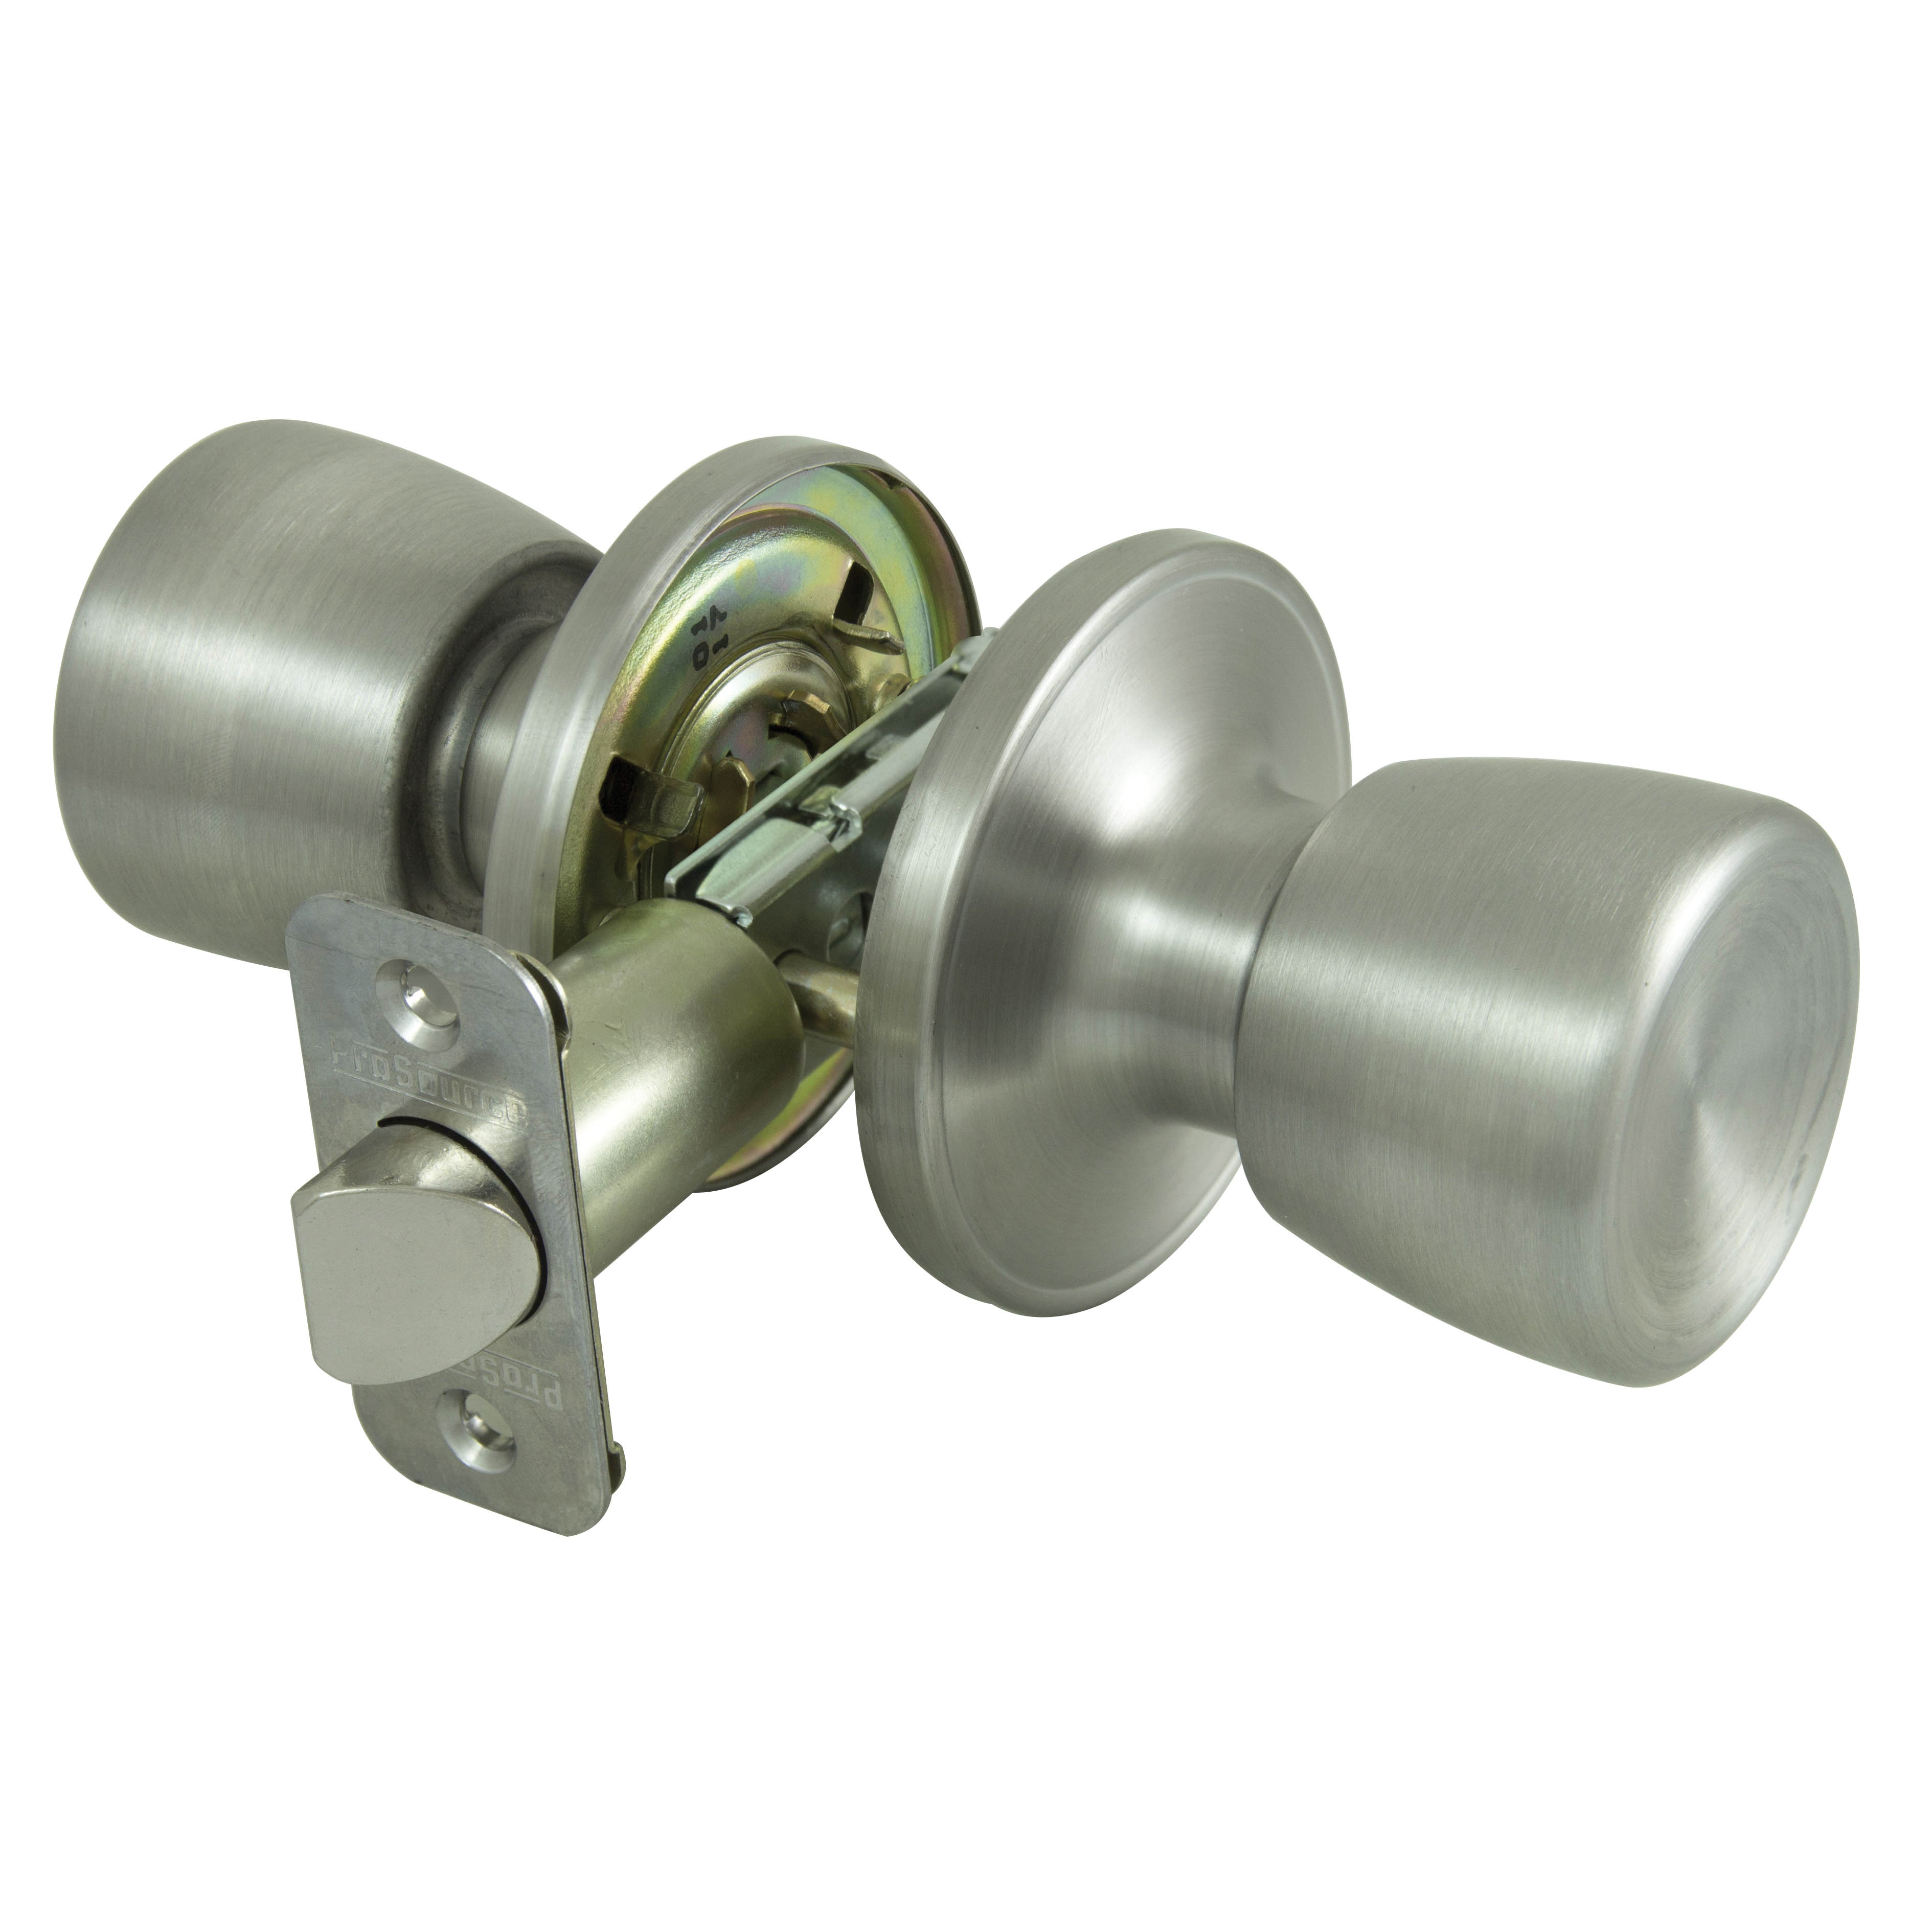 TS630BRA4B Passage Knob, Metal, Stainless Steel, 2-3/8 to 2-3/4 in Backset, 1-3/8 to 1-3/4 in Thick Door